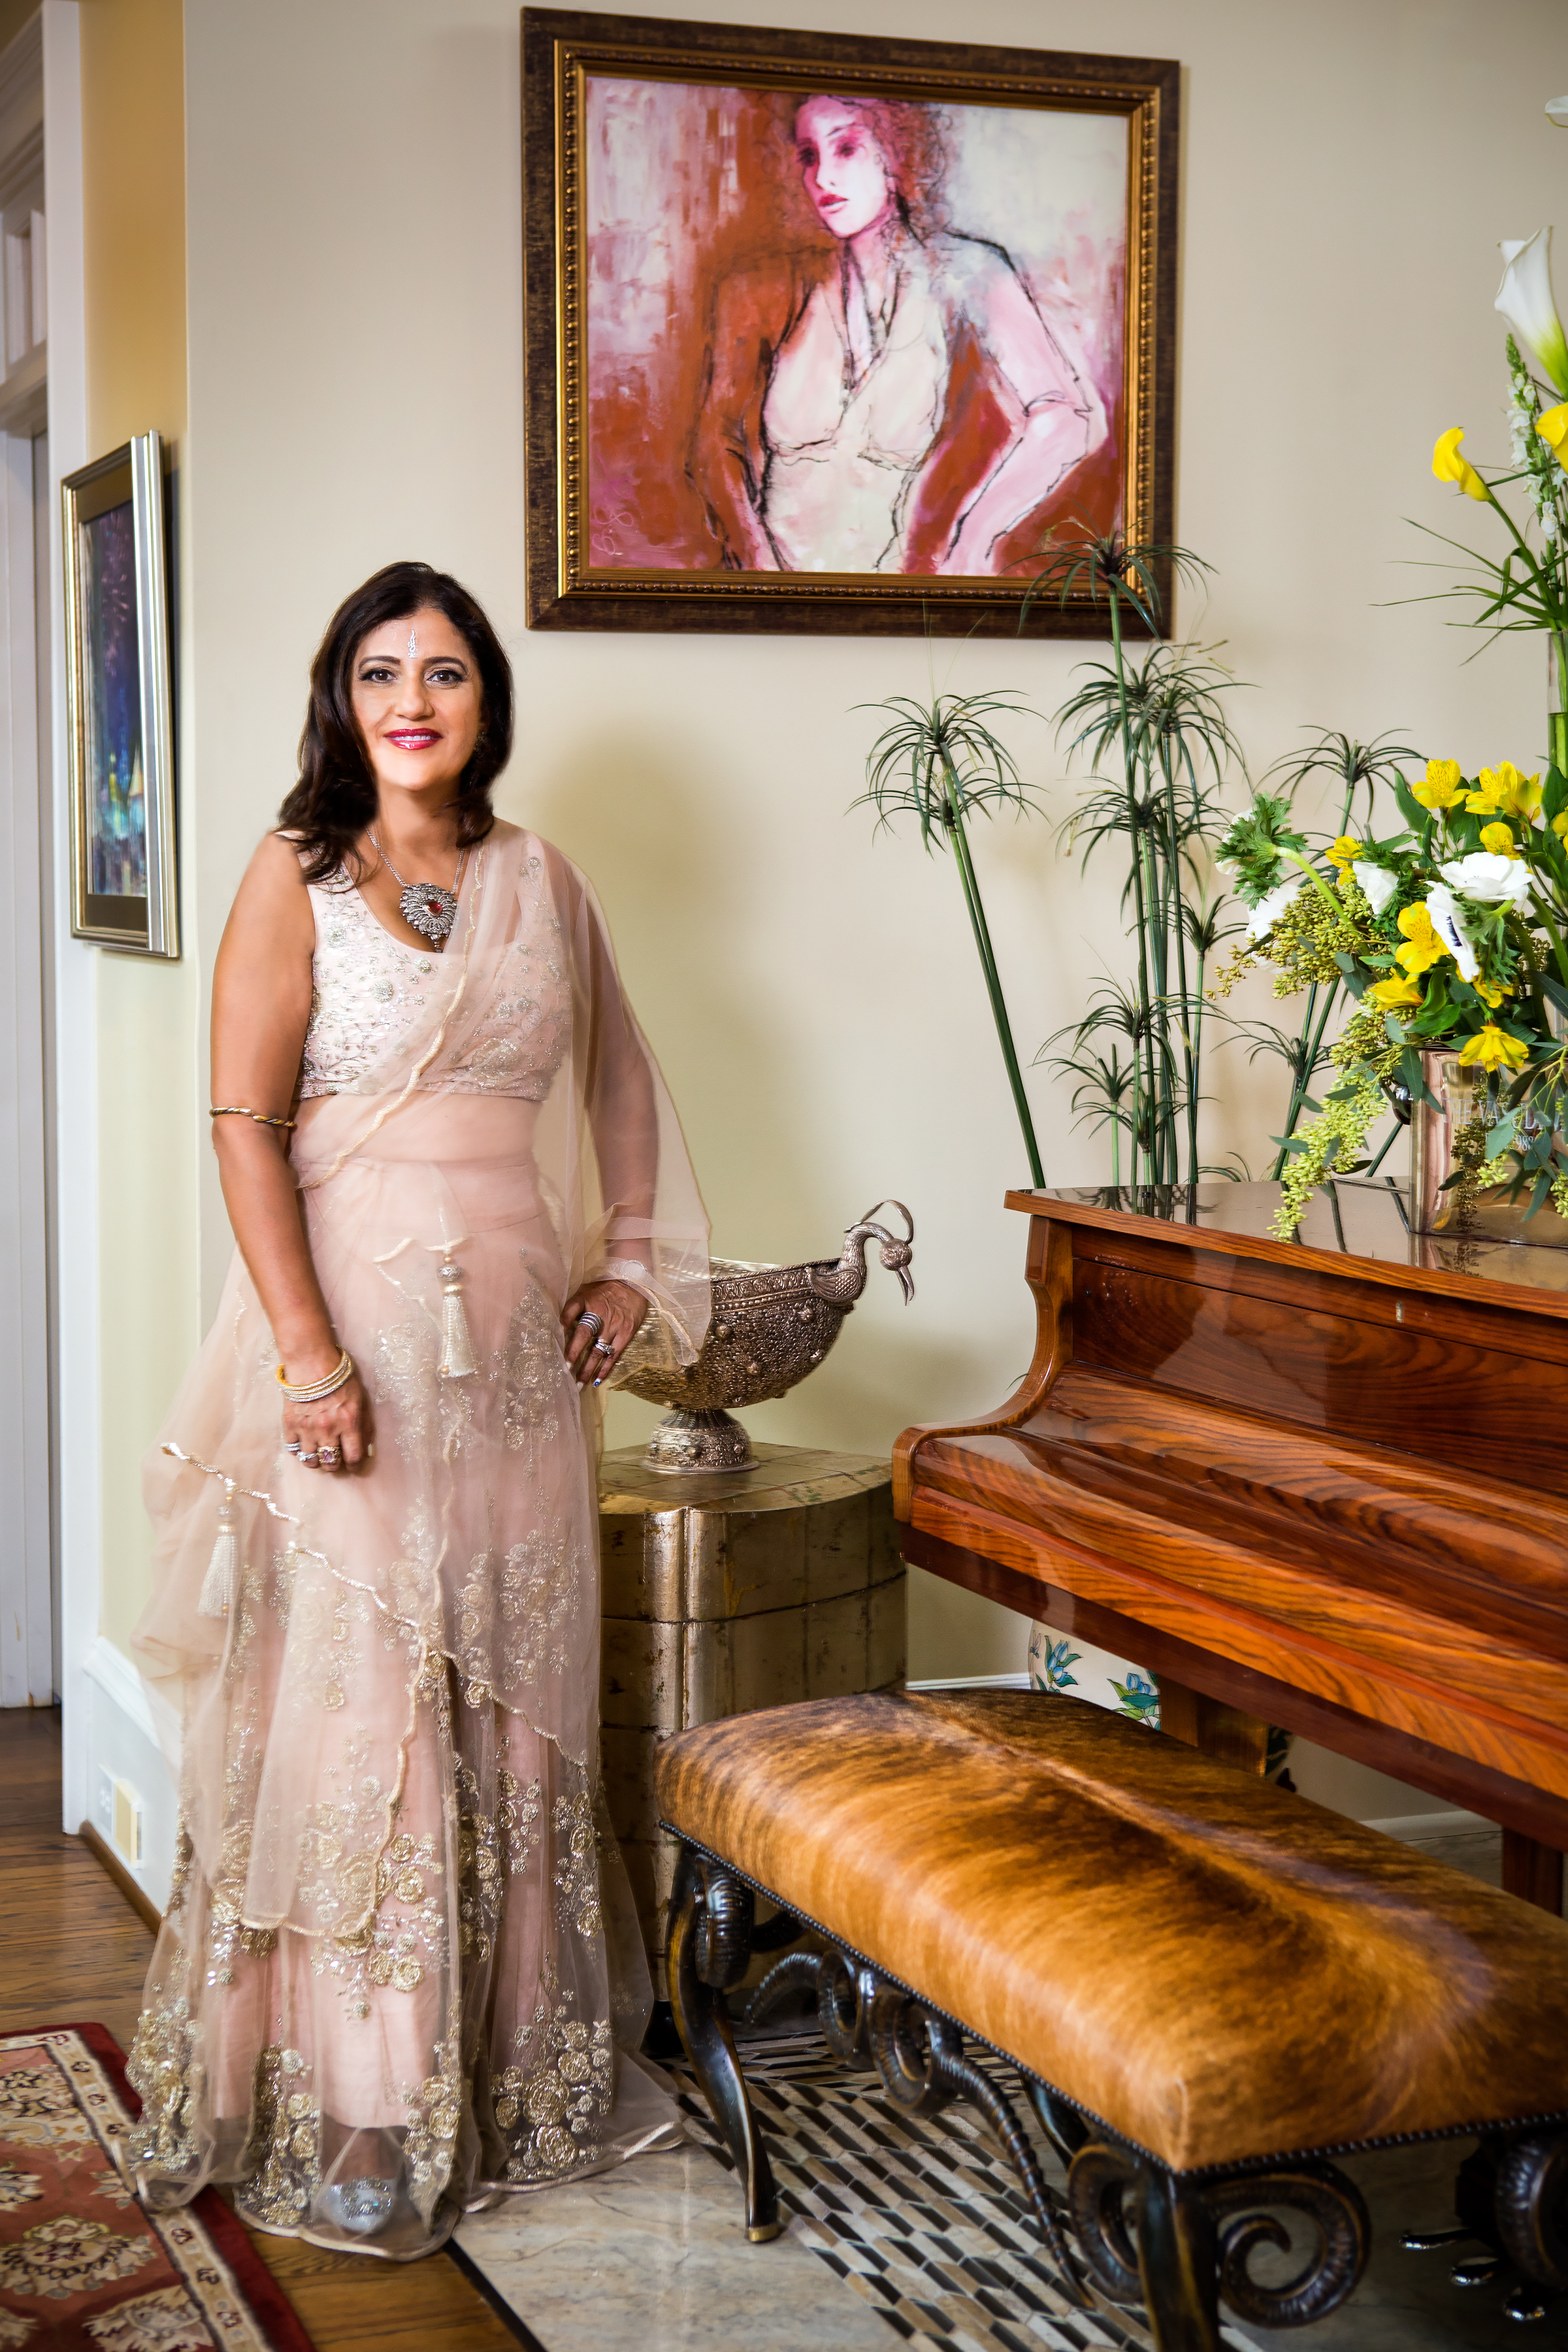 Bhavna poses regally in her living room wearing a Sharara pant set by designer Payal Singal and a mid-19th century pink pear diamond necklace set. 